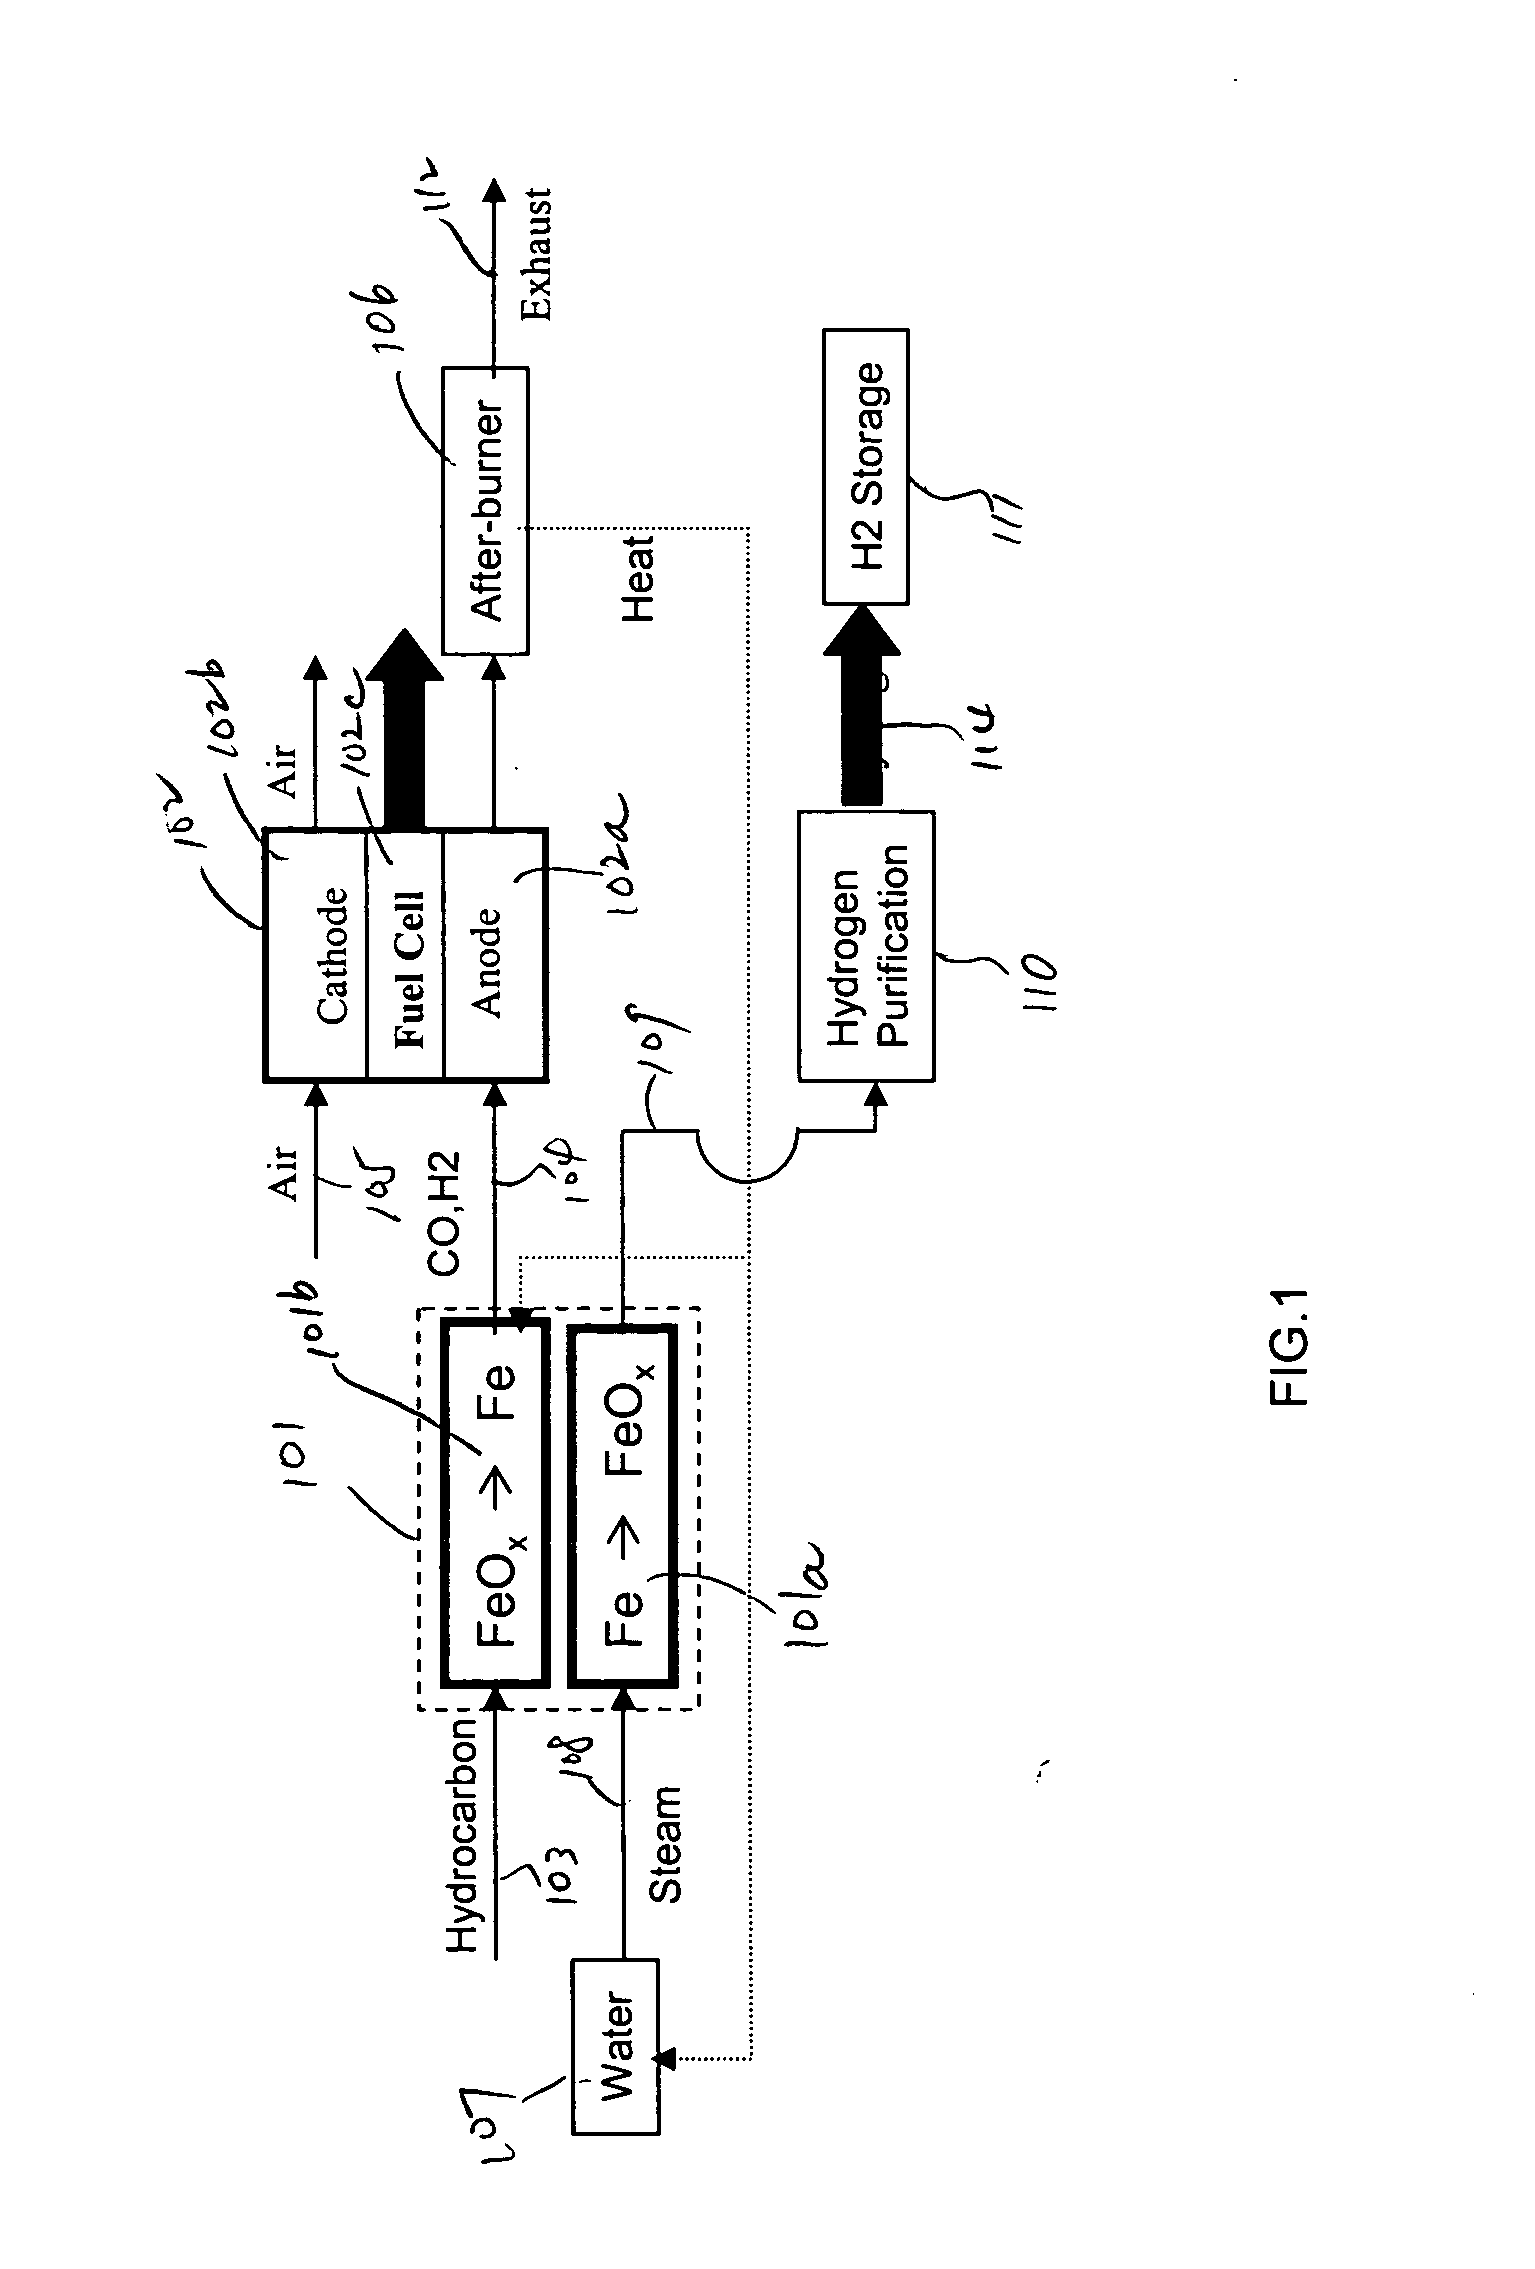 Method for hydrogen and electricity production using steam-iron process and solid oxide fuel cells